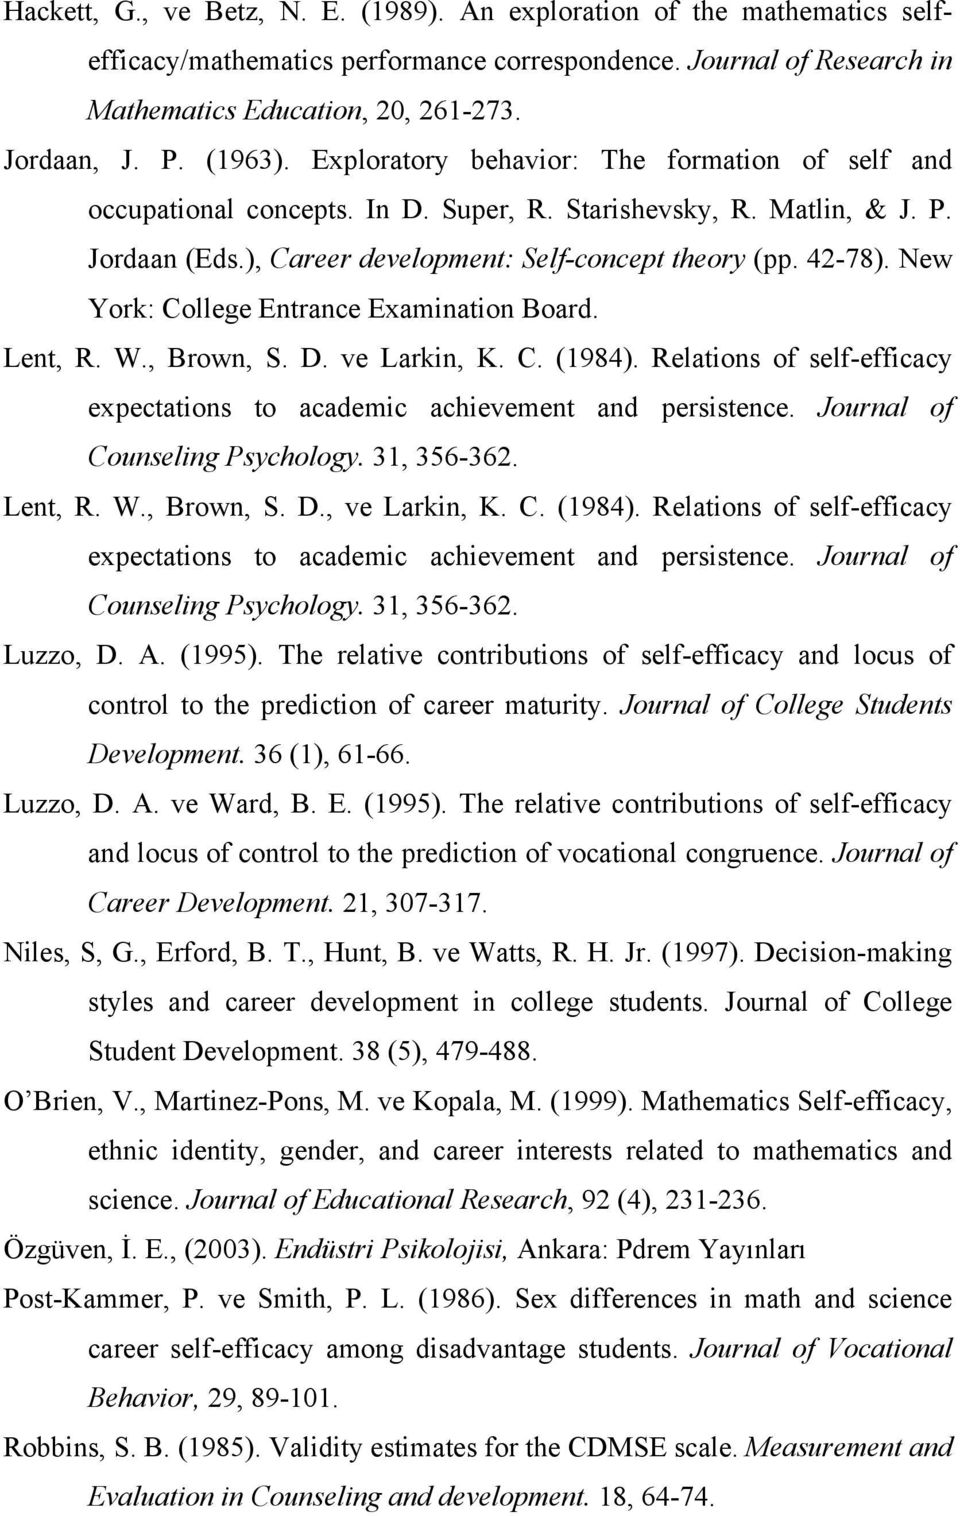 New York: College Entrance Examination Board. Lent, R. W., Brown, S. D. ve Larkin, K. C. (1984). Relations of self-efficacy expectations to academic achievement and persistence.